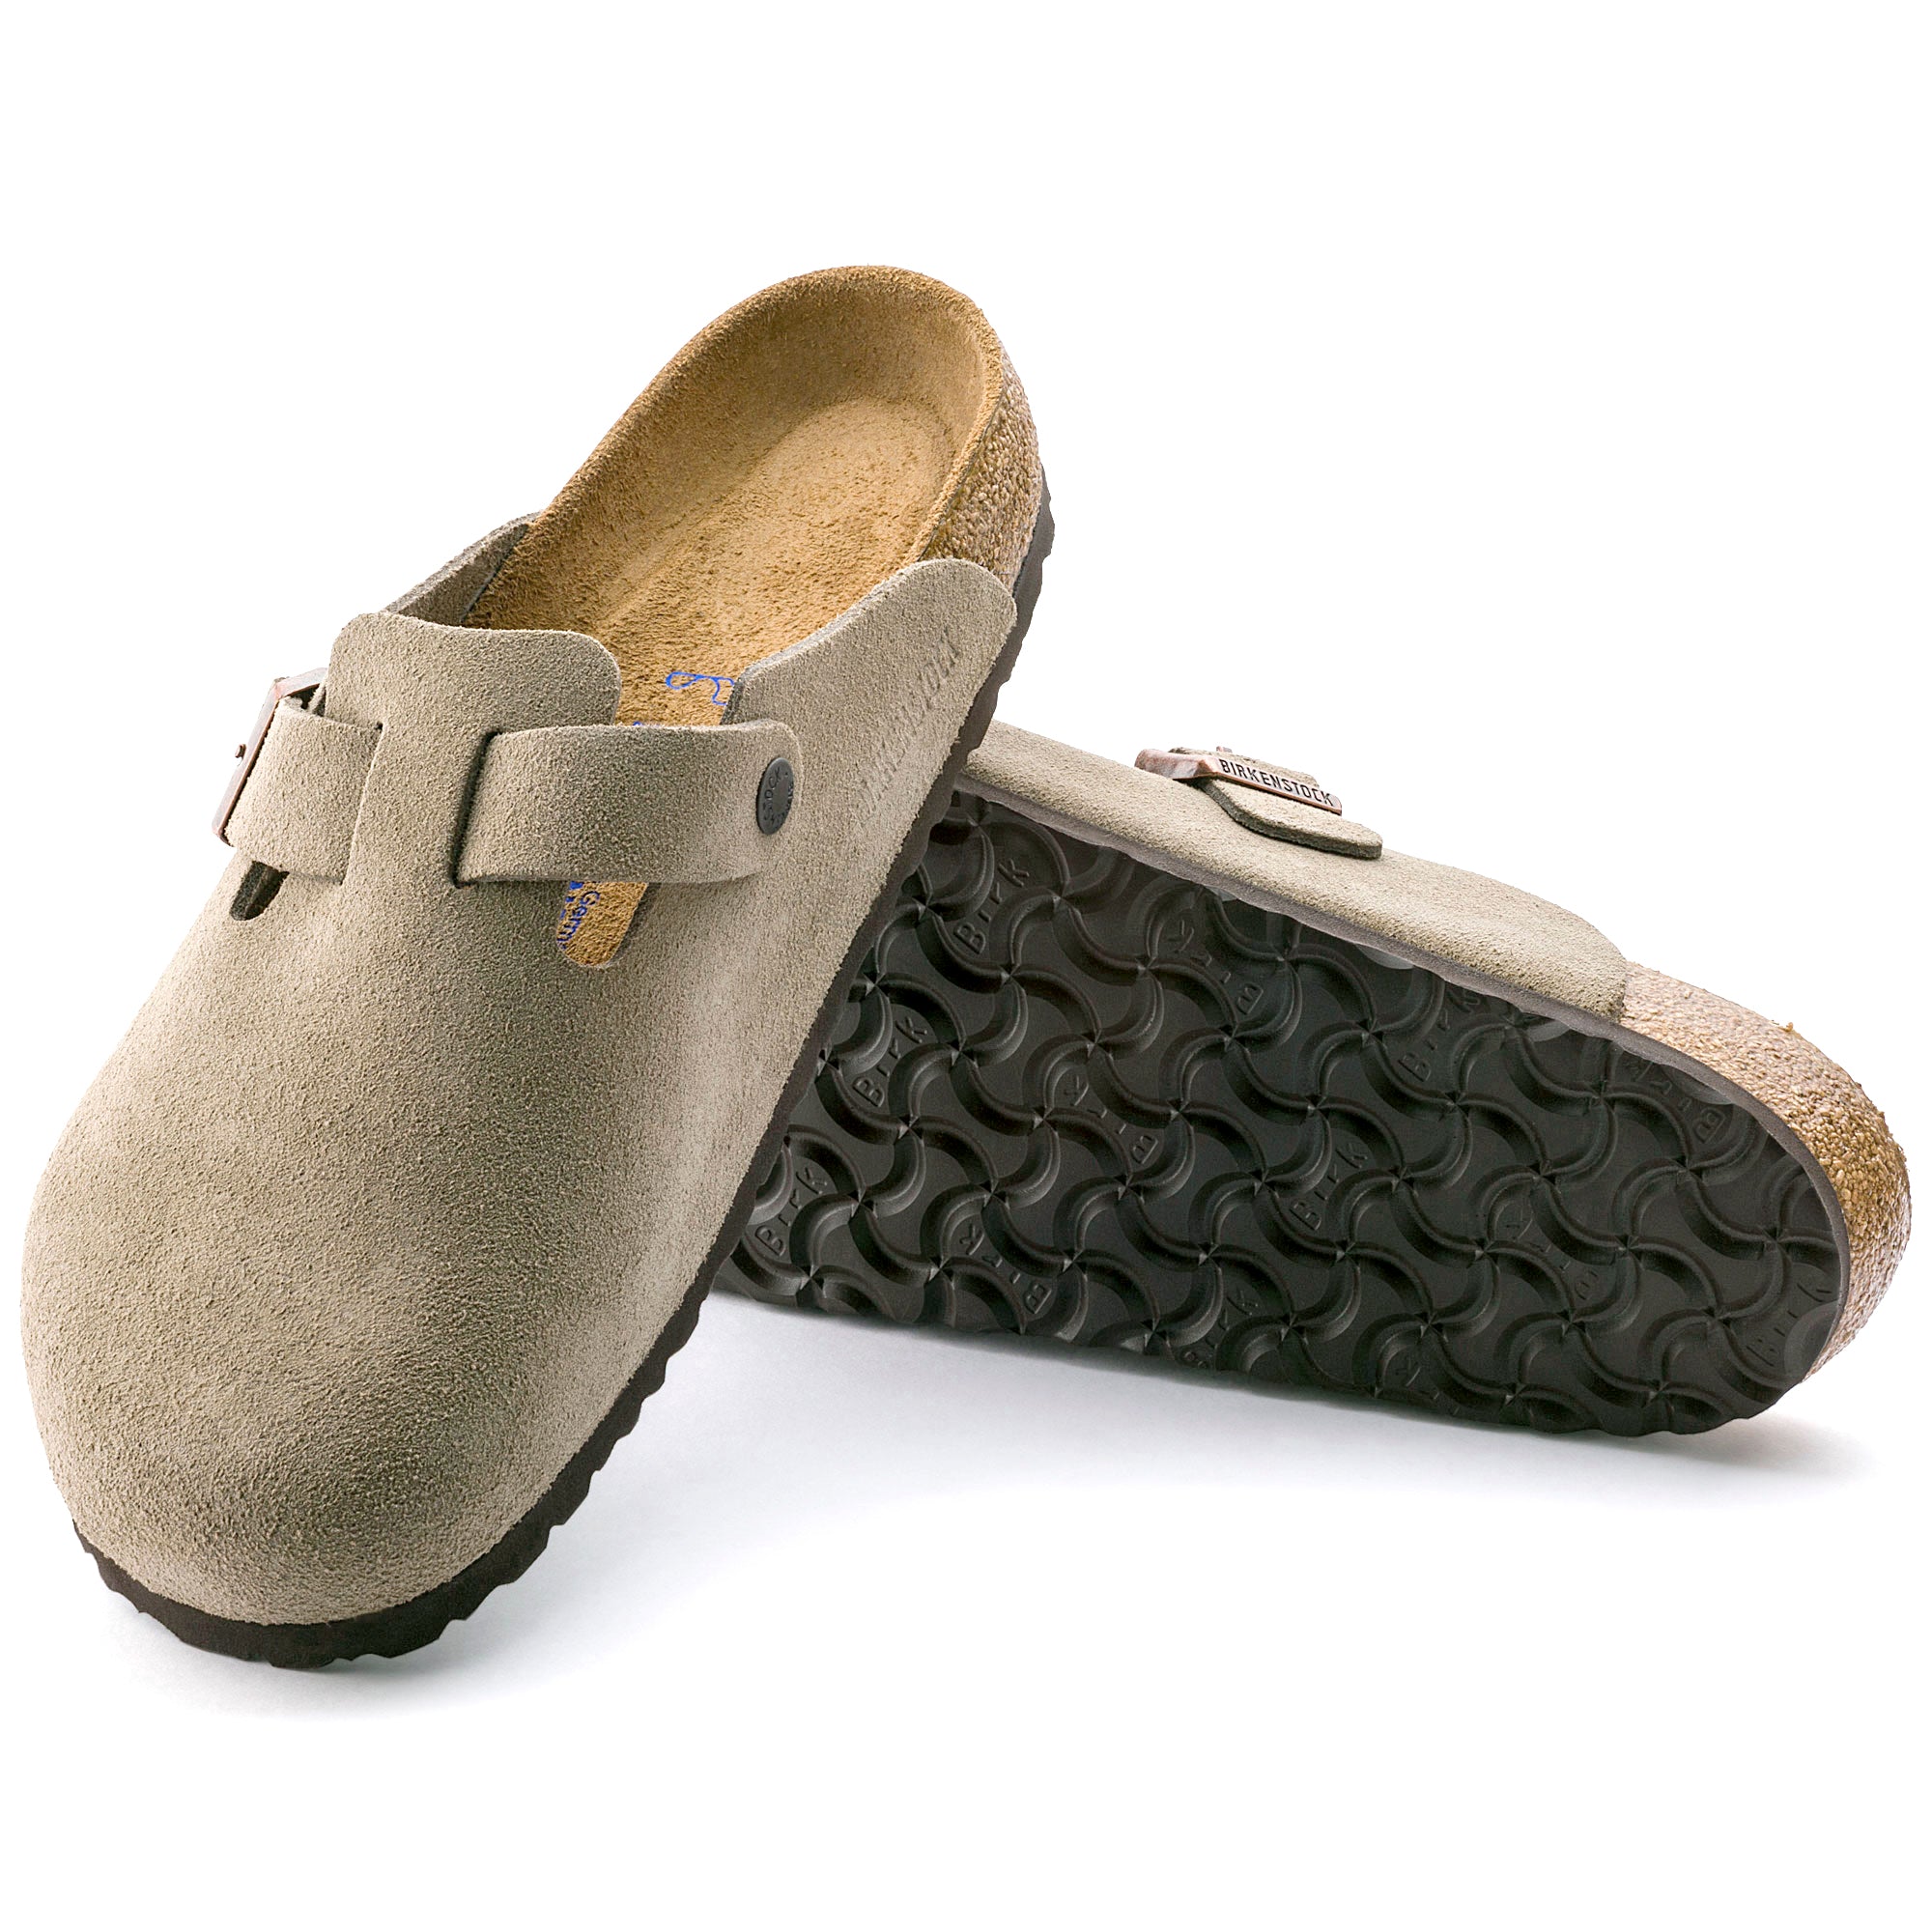 Birkenstock Boston Soft Footbed taupe suede